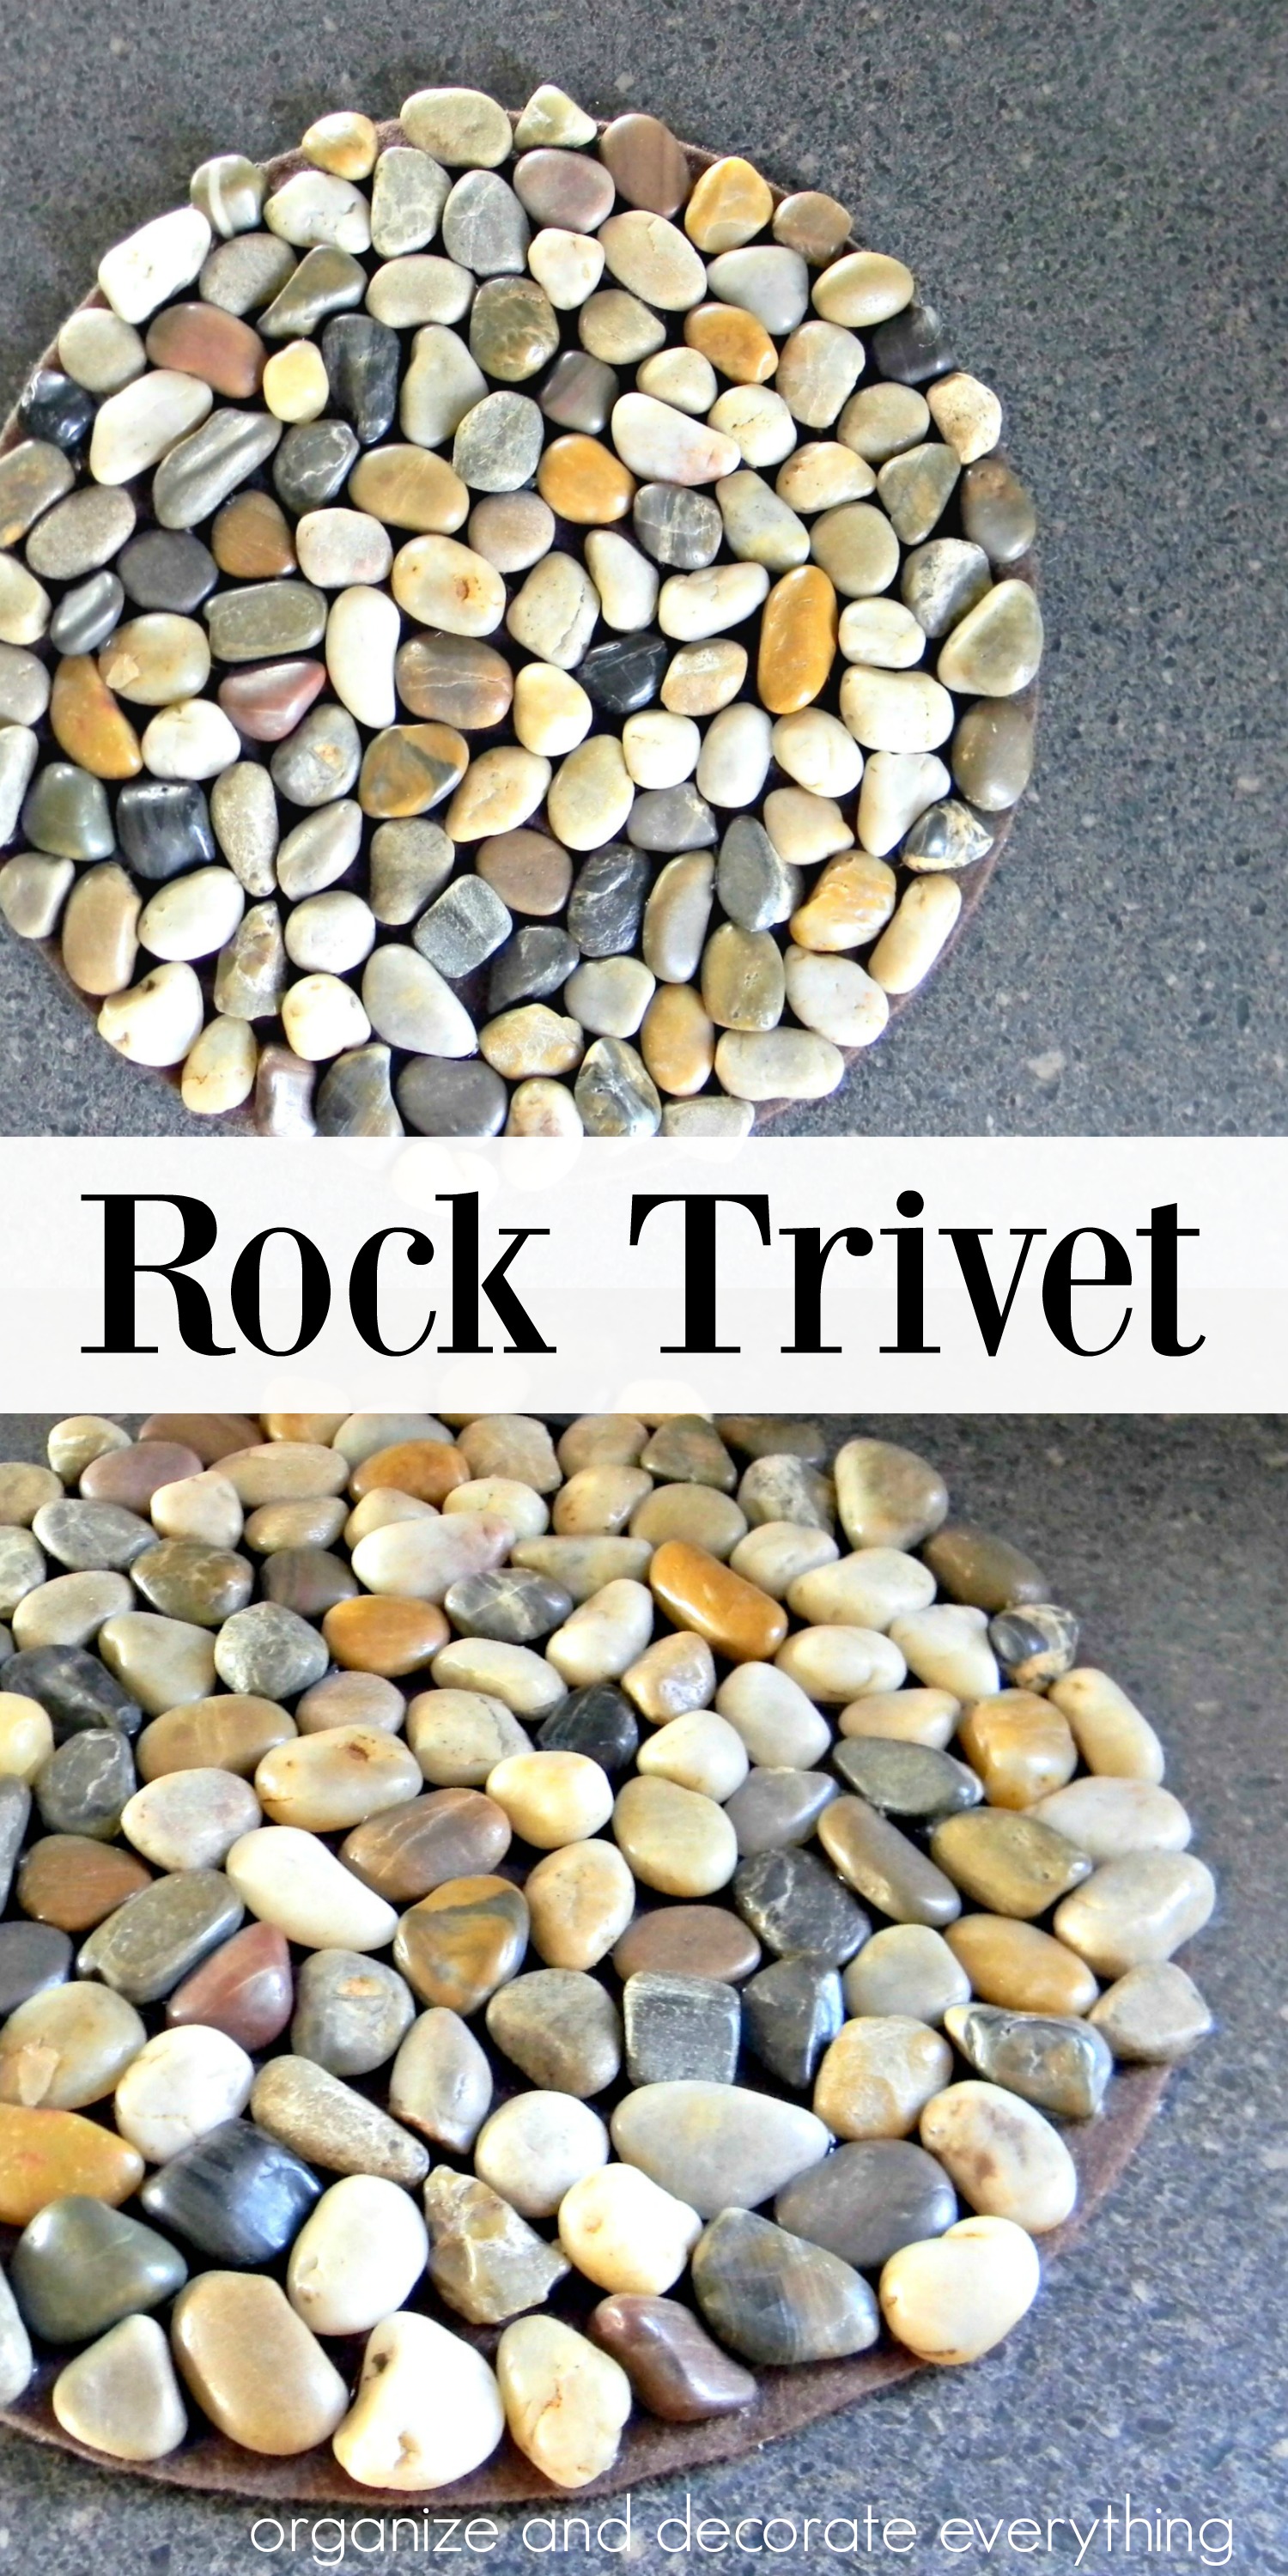 Rock Trivet - Organize and Decorate Everything